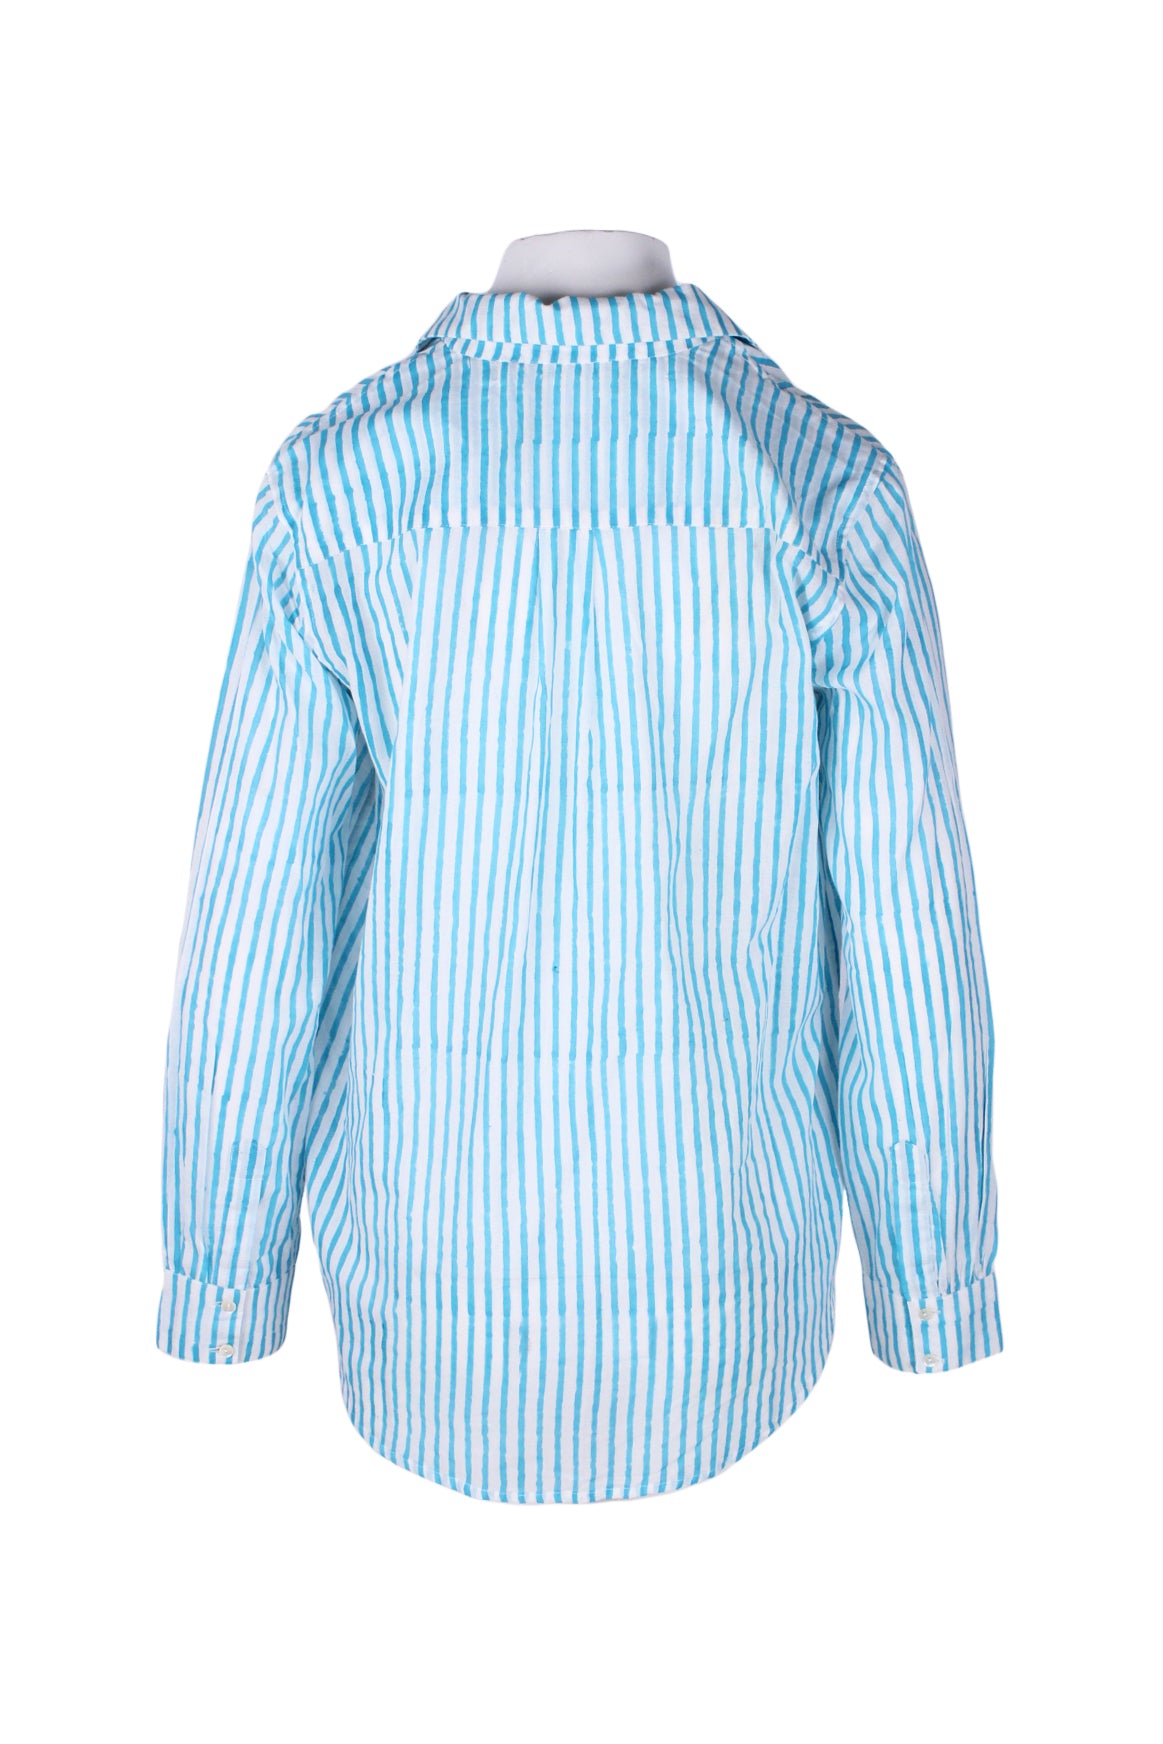 back angle of striped long sleeve shirt. buttoned cuffs. 